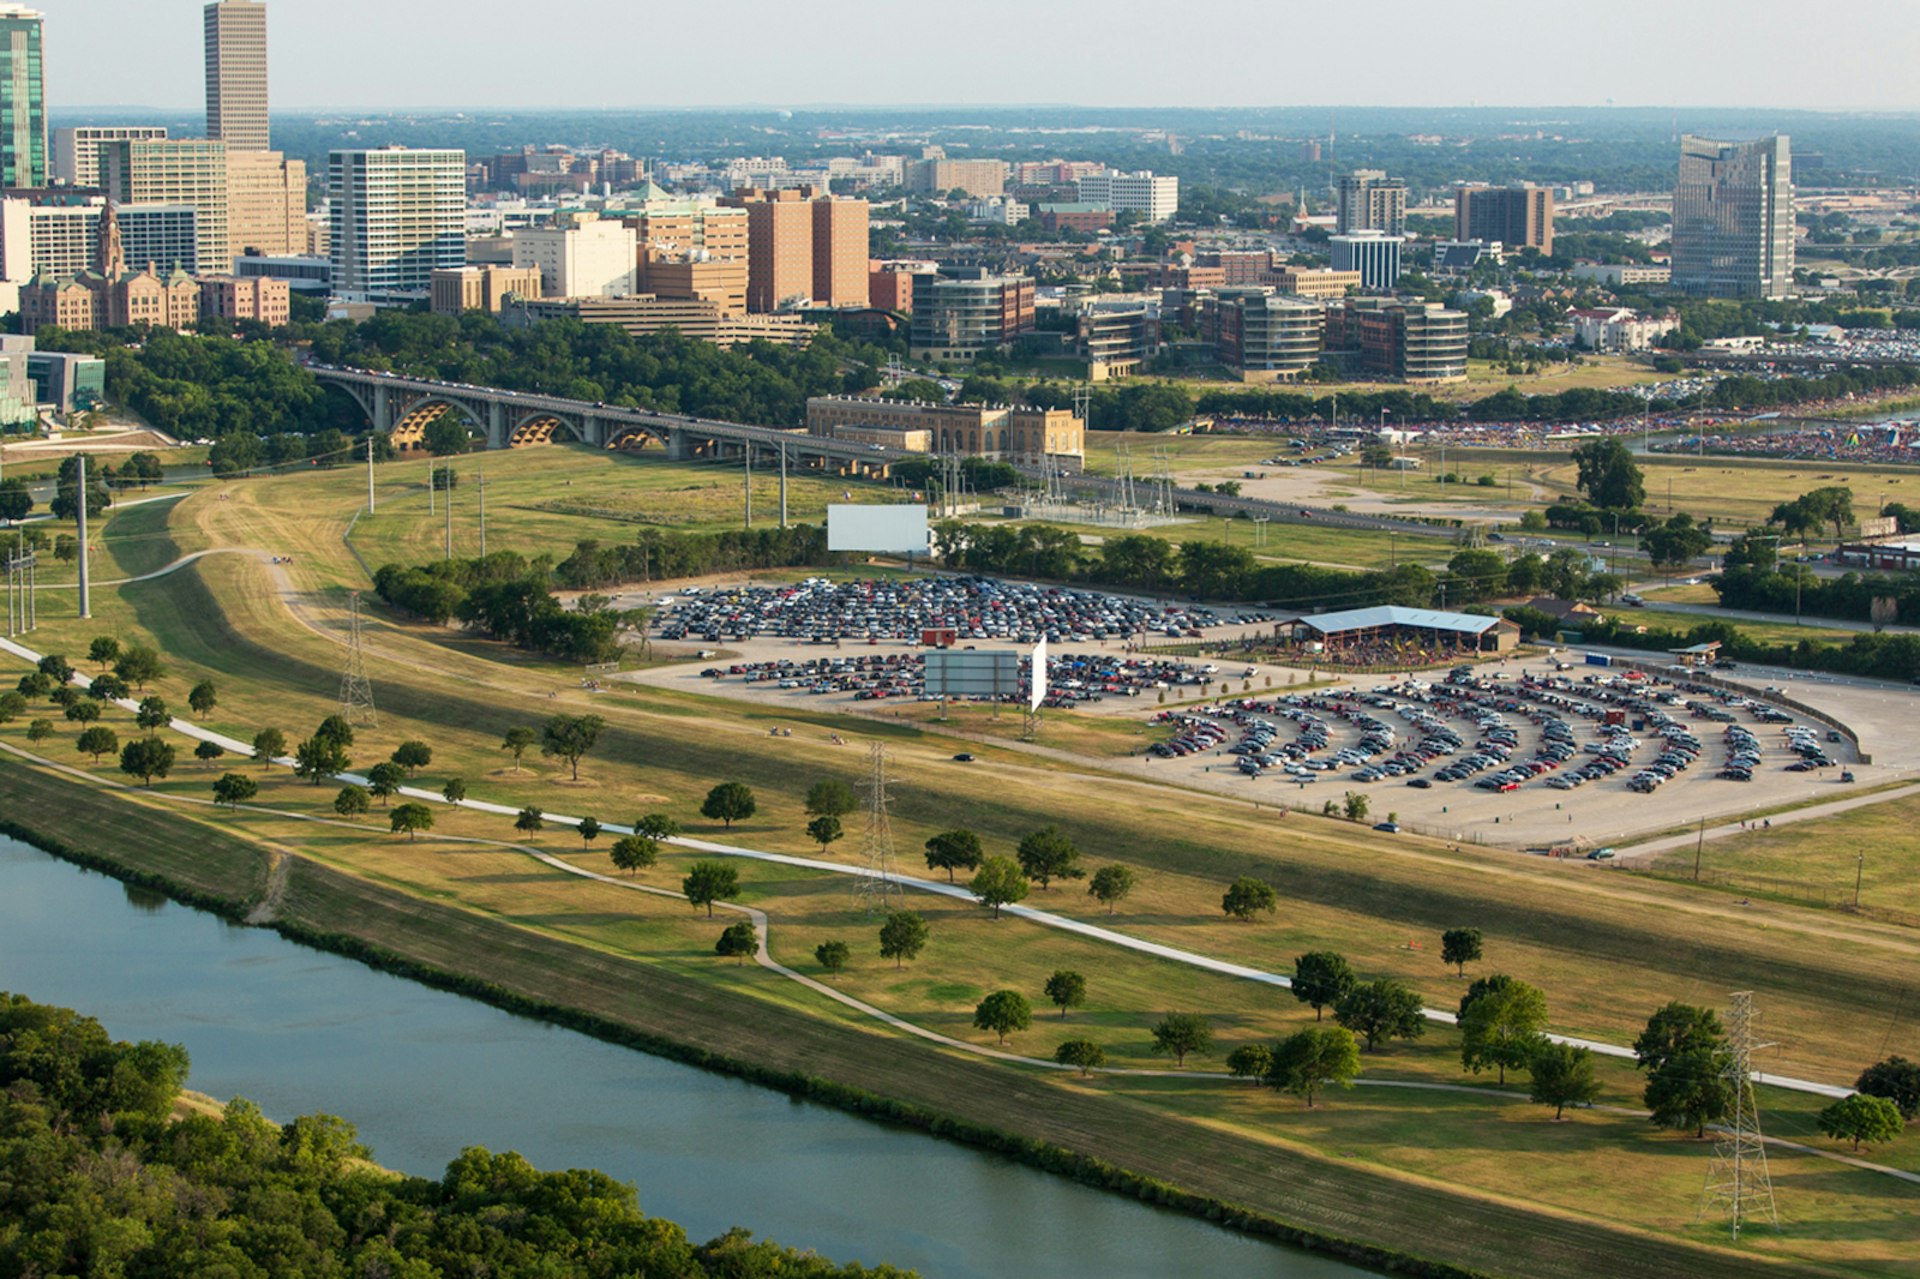 An aerial view of the Coyote Drive-in, Fort Worth